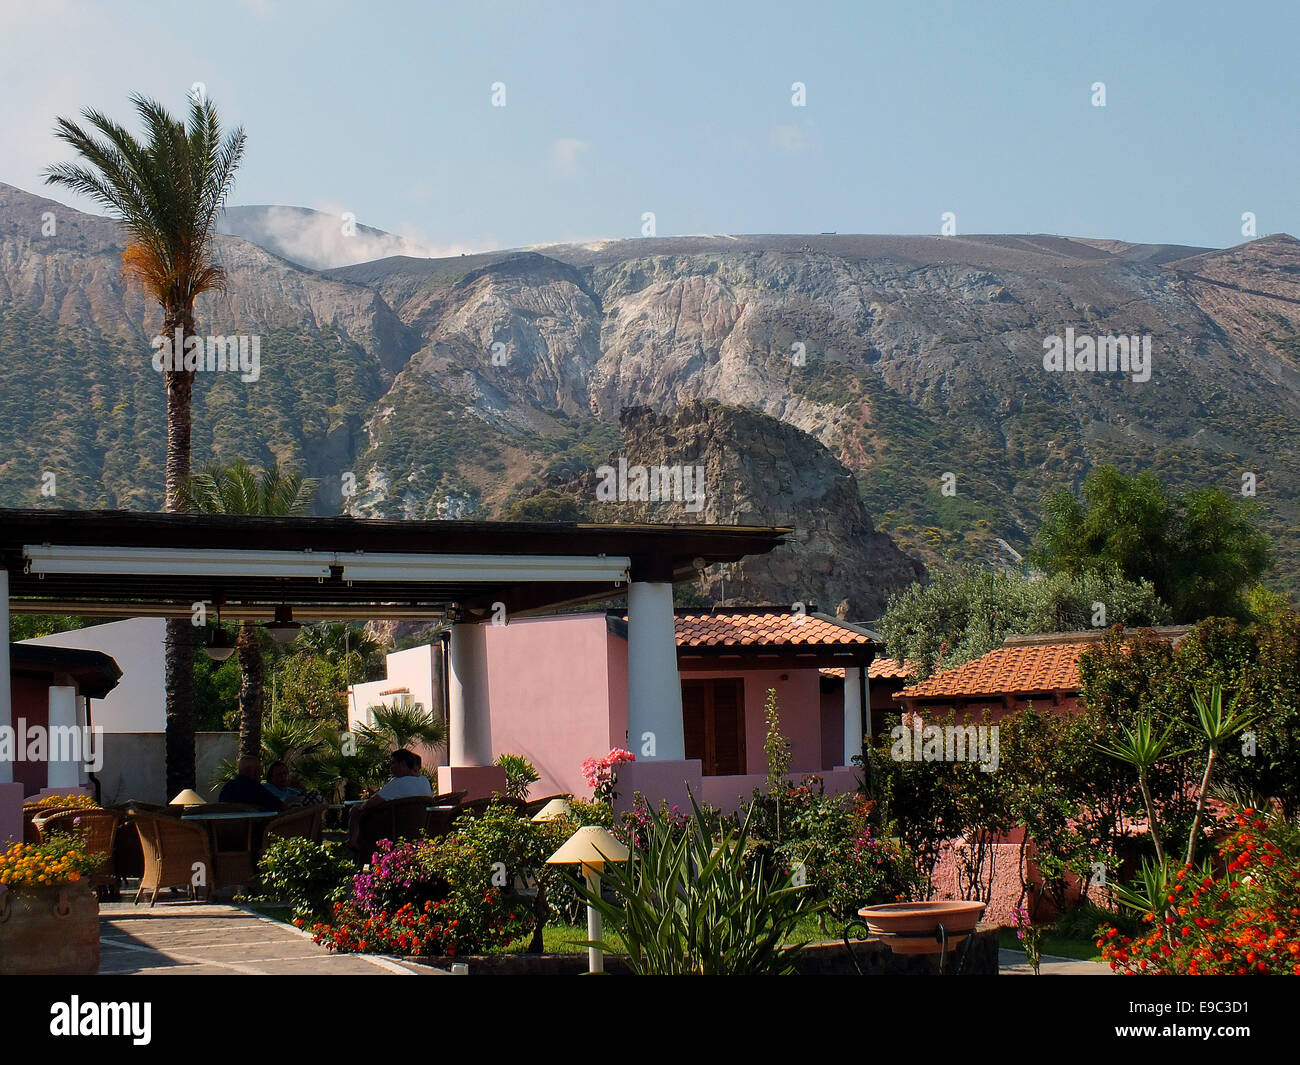 Aeolian architecture in palm garden with a view of the smoking volcano craters Gran Cratere - June 2014 Stock Photo